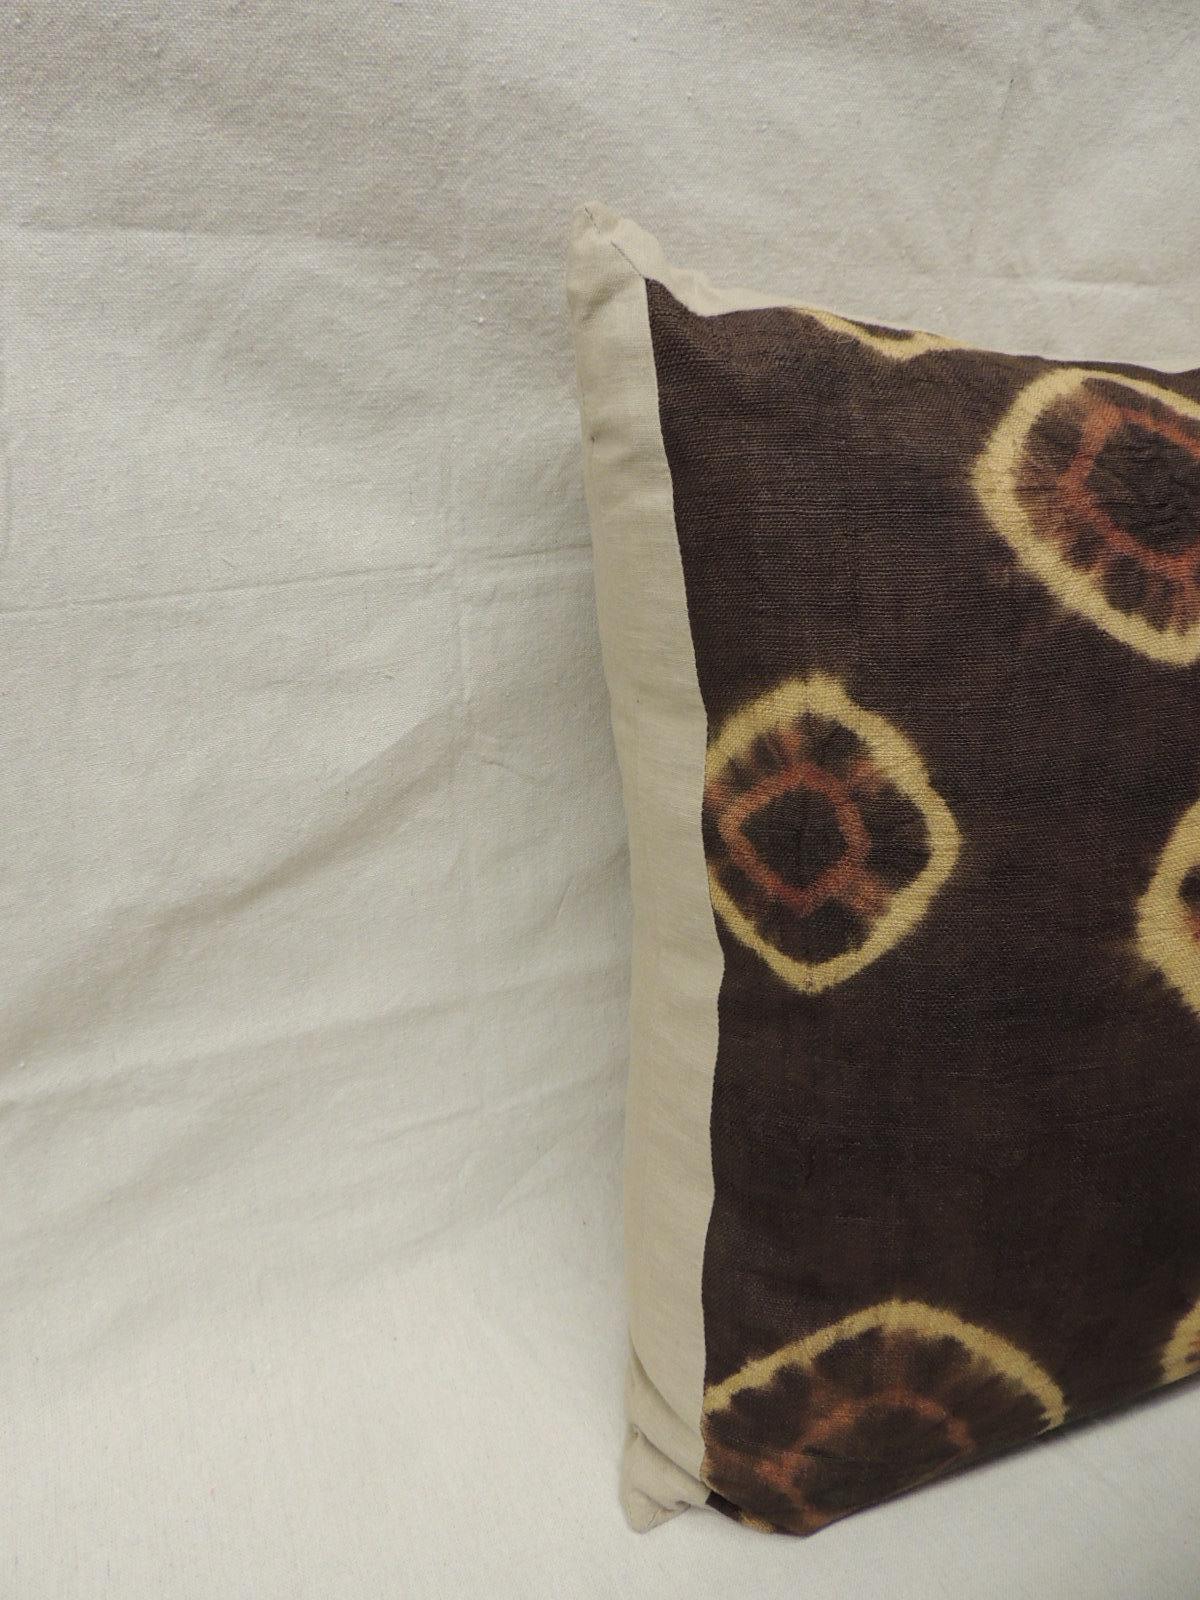 Brown and orange vintage resist dye African decorative pillow.
Raffia pillows in brown with orange accents, framed and backed with vintage mocha soft color linen.
Decorative pillow handcrafted and designed in the USA. Closure by stitch (no zipper